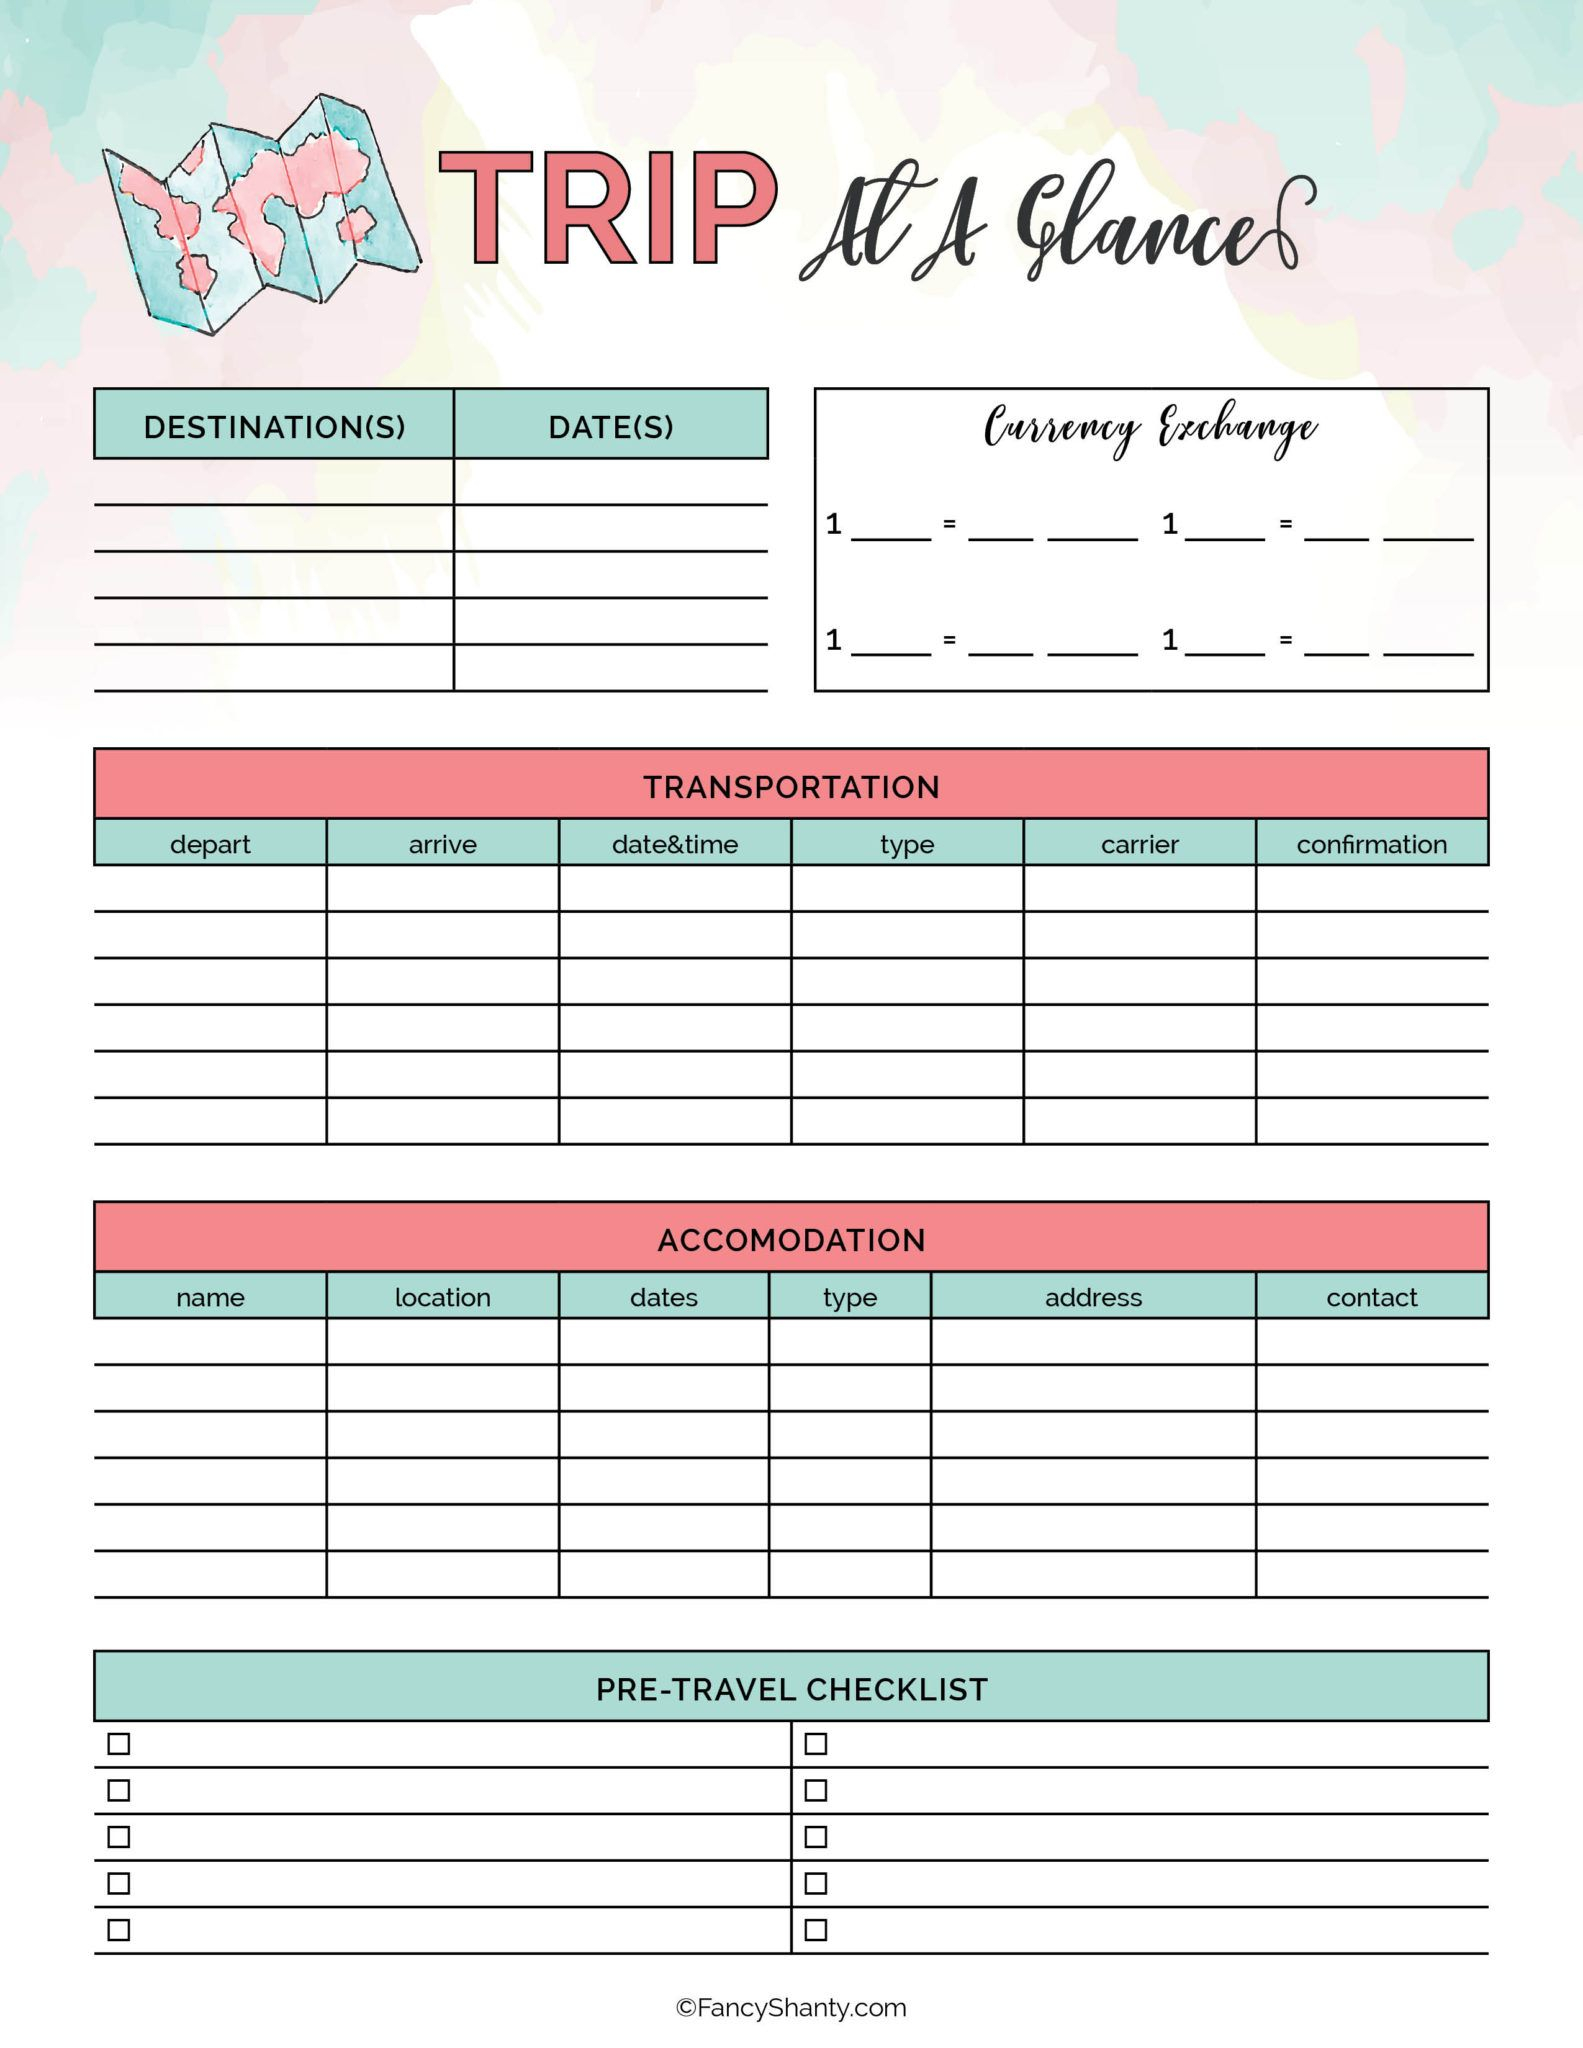 Vacation Planner Free Printable Guide For Planning Weekly E Week  Intended For Leisure Travel Itinerary Template Regarding Leisure Travel Itinerary Template